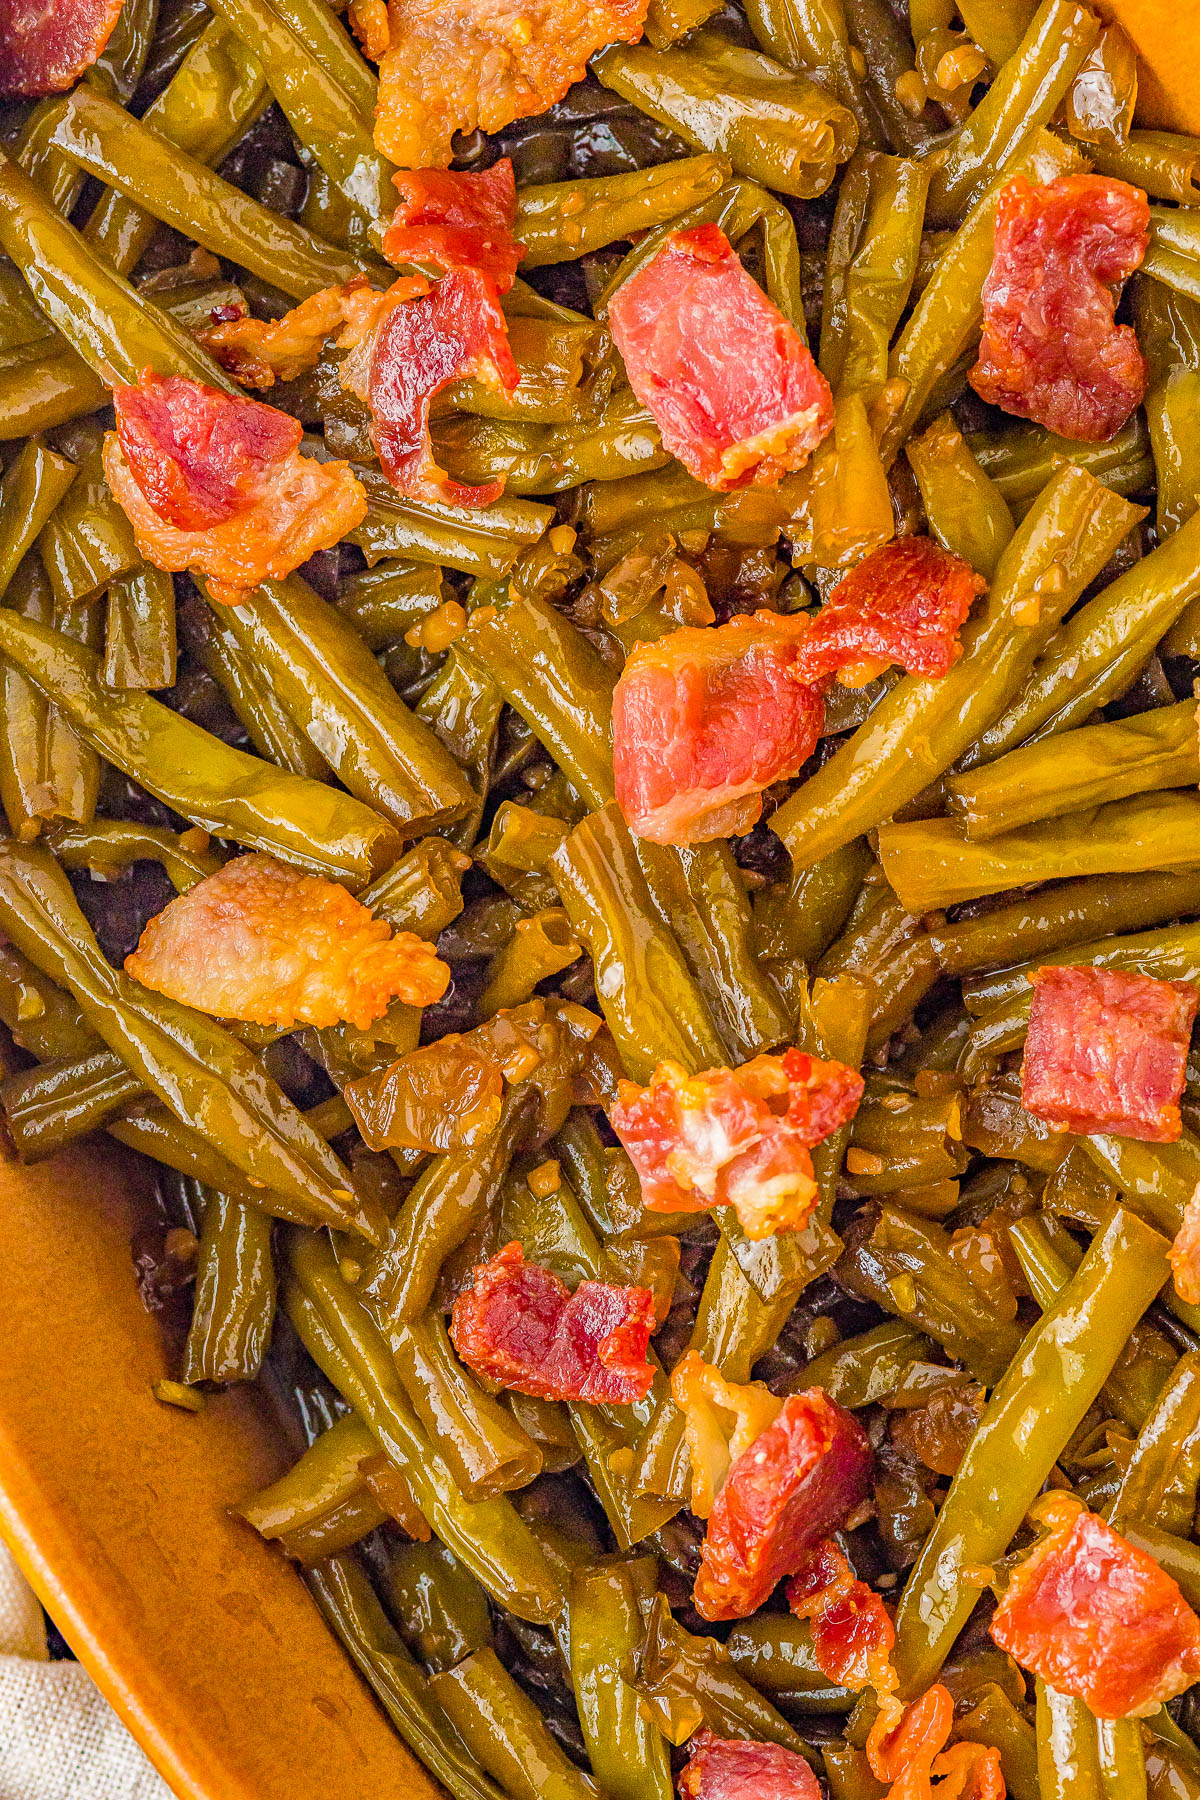 Green Beans with Bacon - Think it's impossible to love green beans? Guess again! These green beans are made extra delish with brown sugar, onions, garlic, and plenty of bacon! Eating your veggies has never been this EASY or tasty and even the pickiest eaters will gobble them up! Perfect for busy weeknights or as a great holiday side dish for Thanksgiving or Christmas!